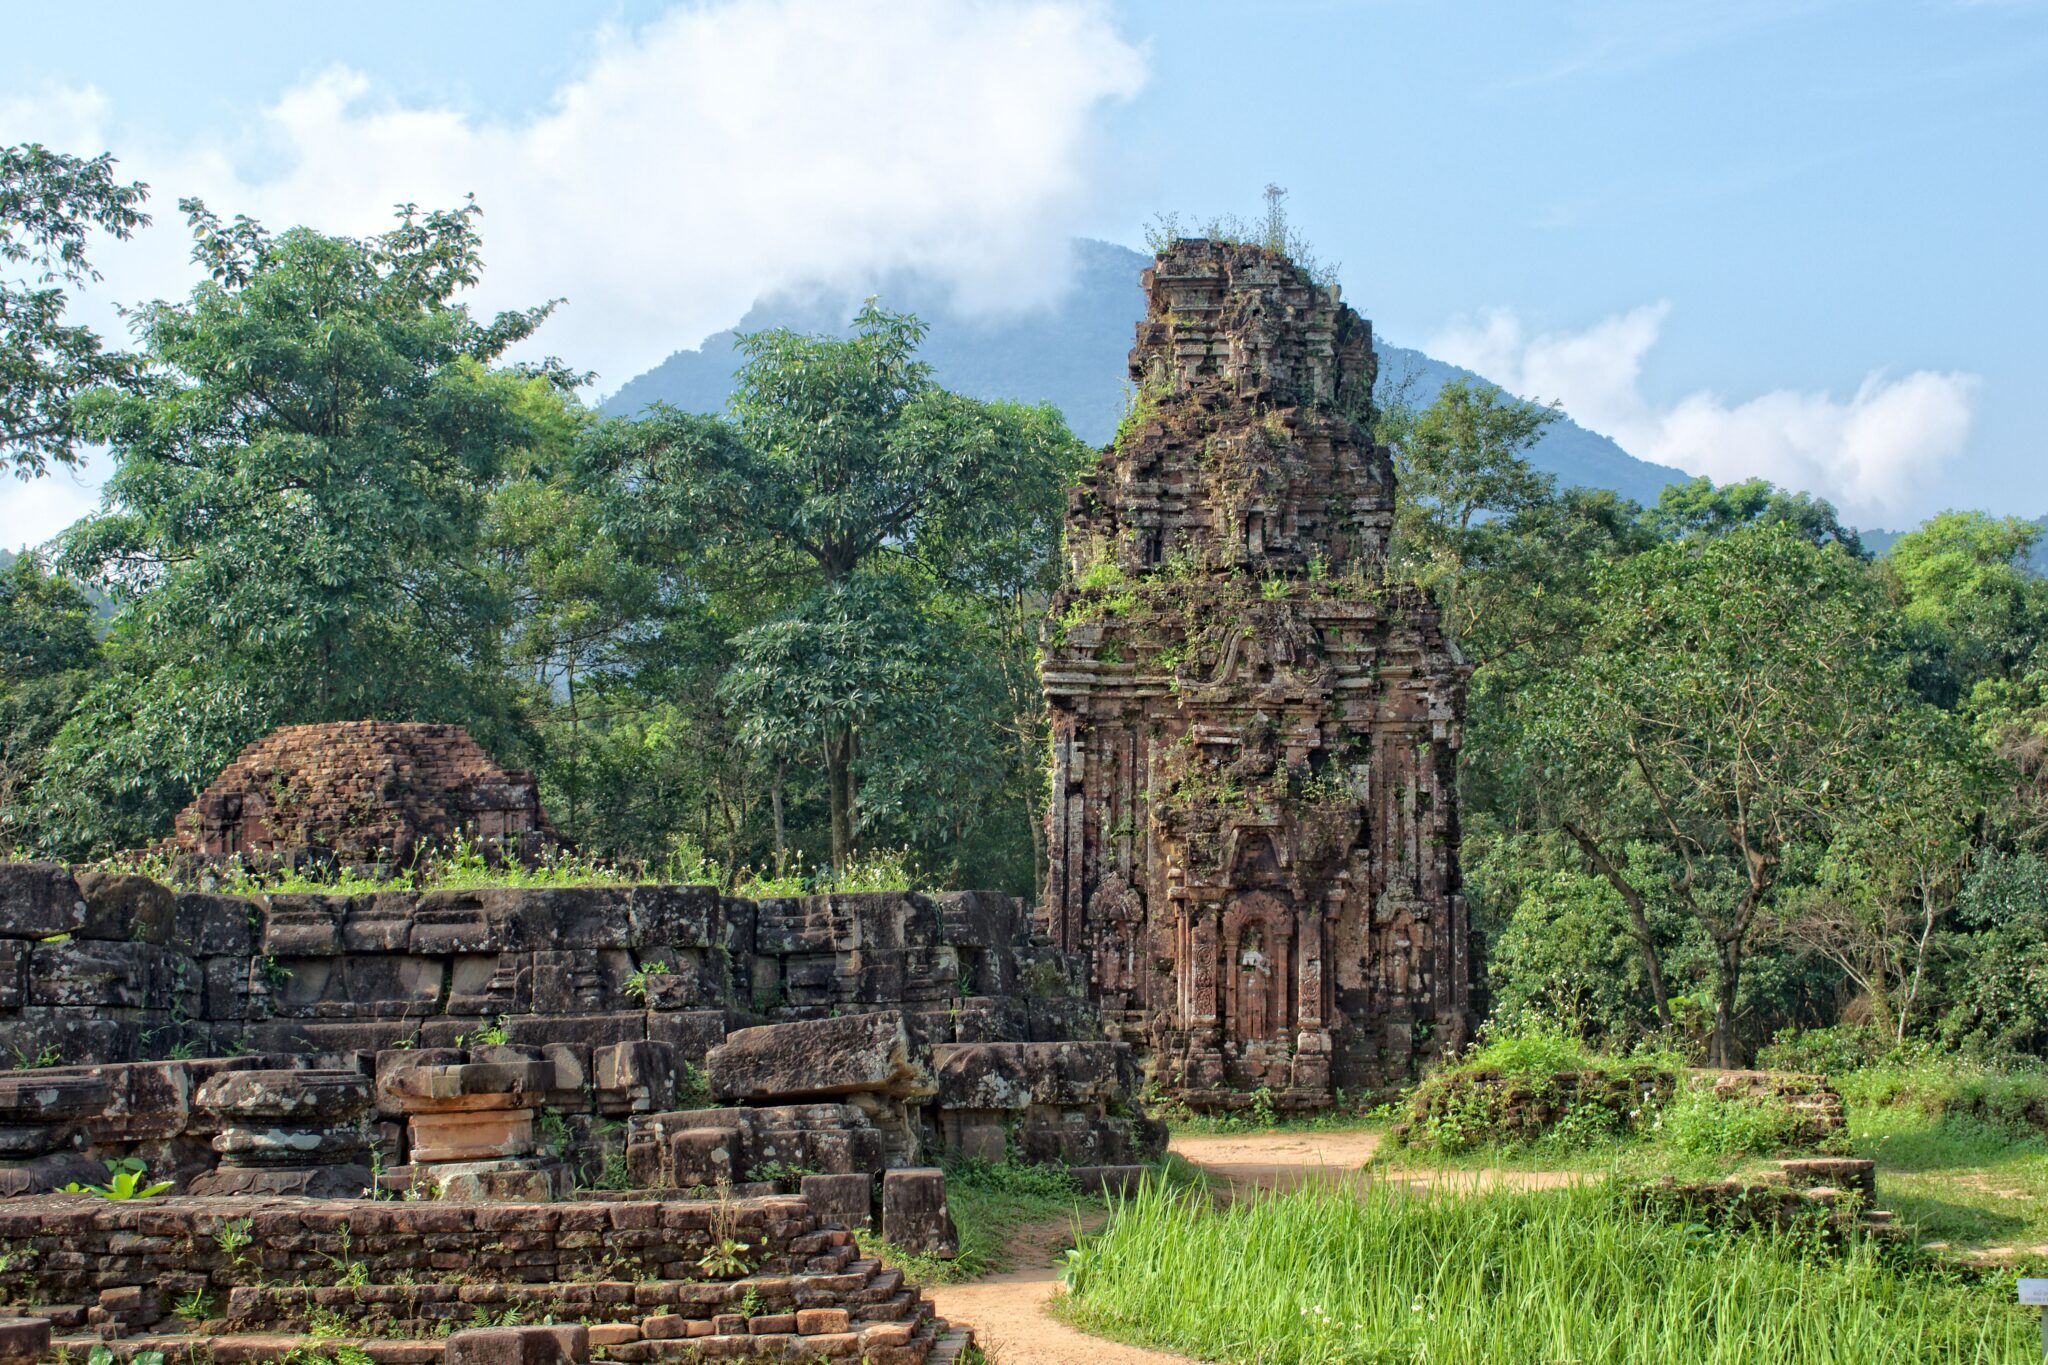 My Son Sanctuary: Explore the 1600-year-old ruins of the Champa Kingdom